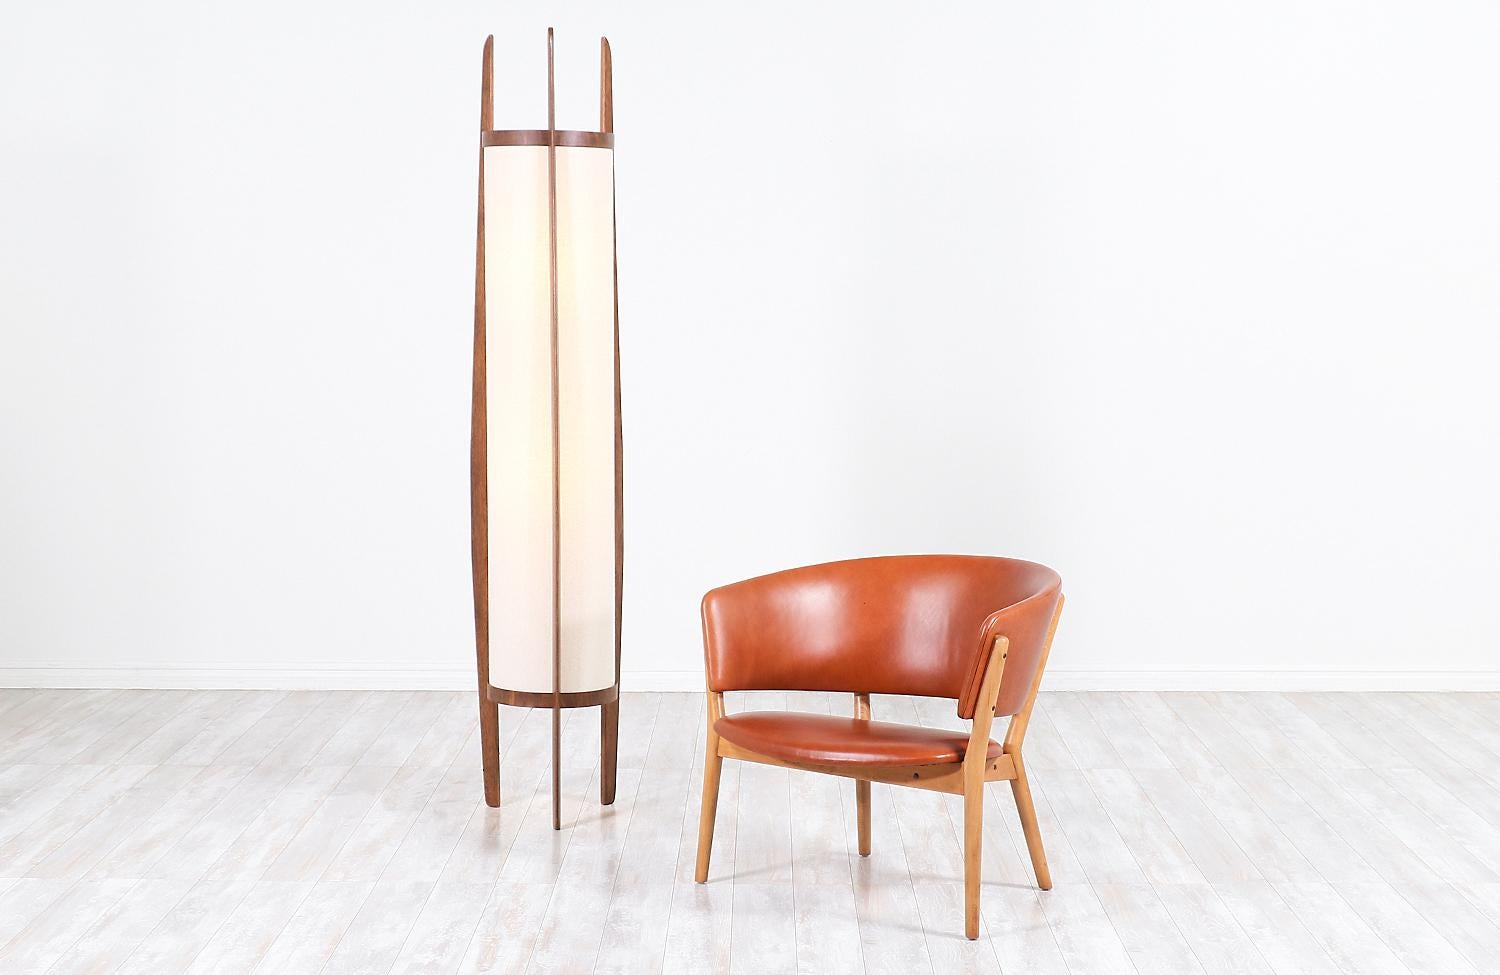 Dazzling vintage floor lamp designed and manufactured by Modeline of California, circa 1960s. This exceptional hand-sculpted floor lamp features a tall sculpted walnut wood body with three asymmetrical arms that go up the body frame holding the new